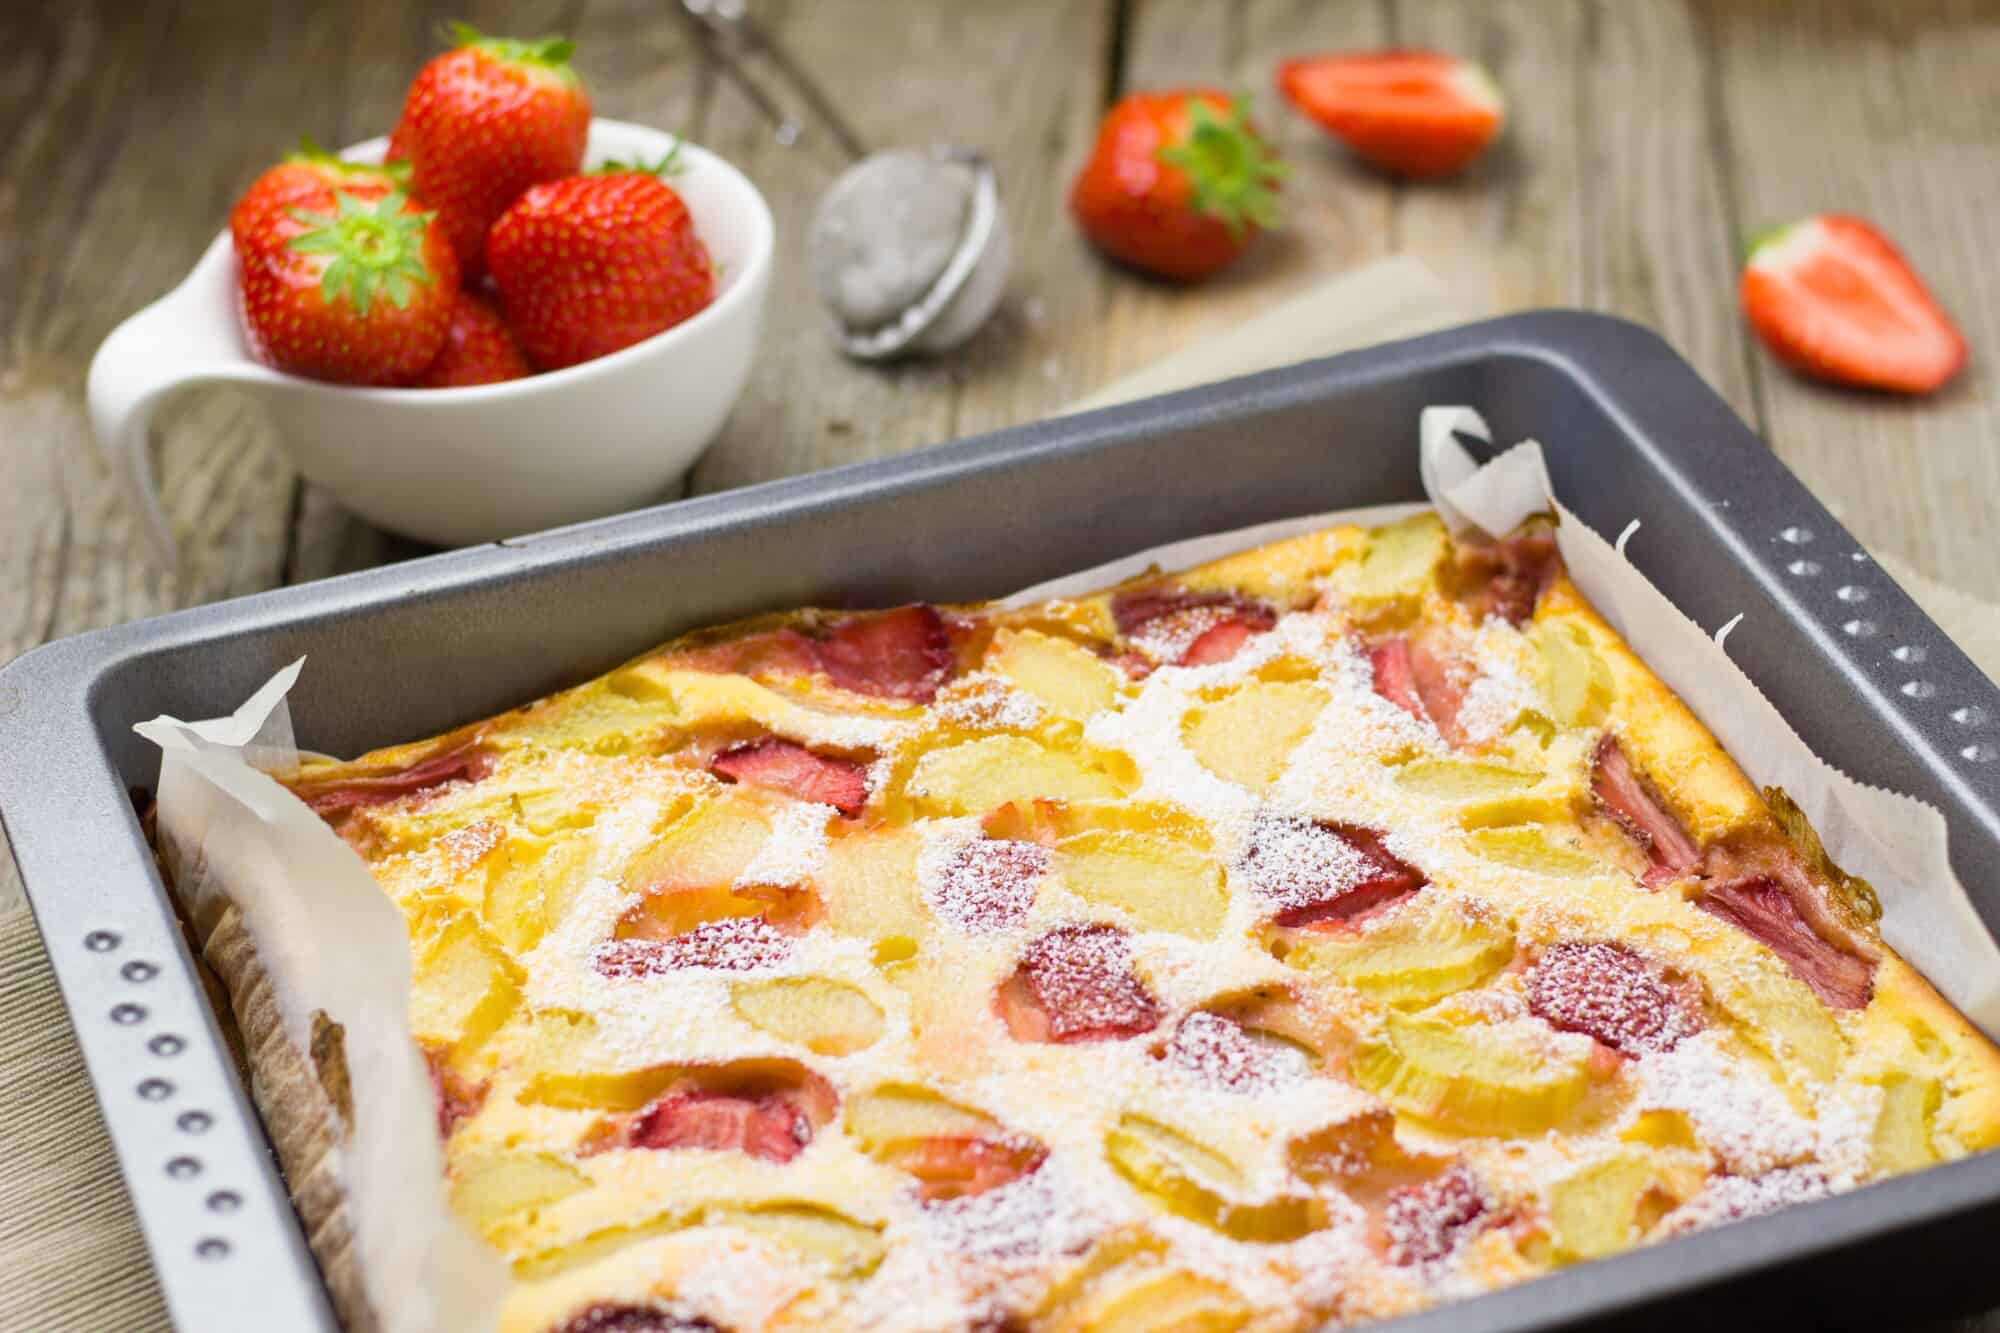 Baking sheet with food.